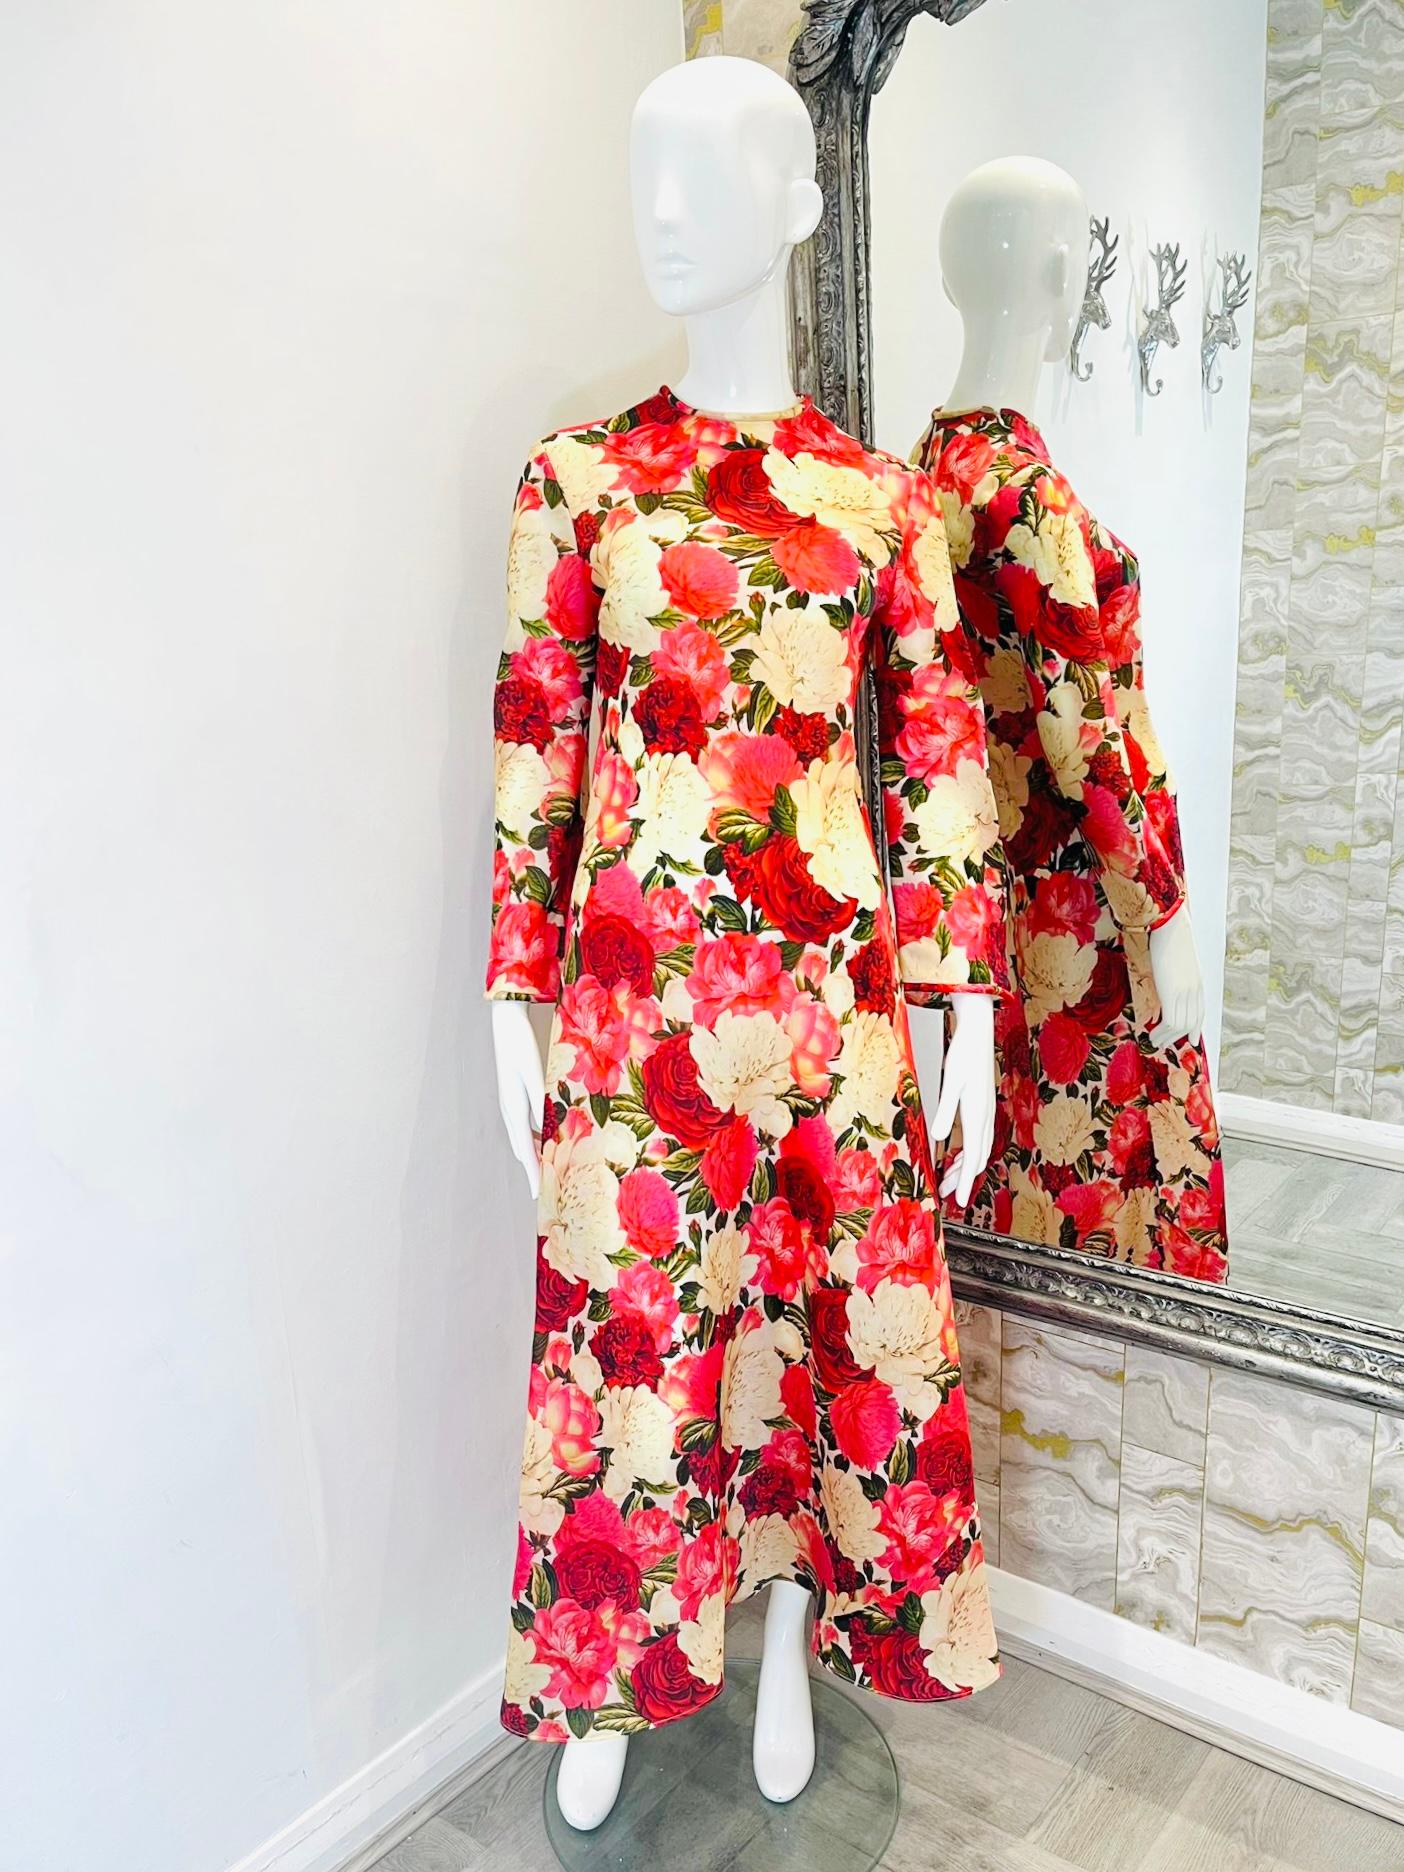 Zimmermann Floral Silk Maxi Dress

Current Season - Wonderlust floral gown. Round neck, bell long sleeves.

Rrp £1,500.

Size - 1

Condition - Excellent

Composition - Silk (No label but corresponds)